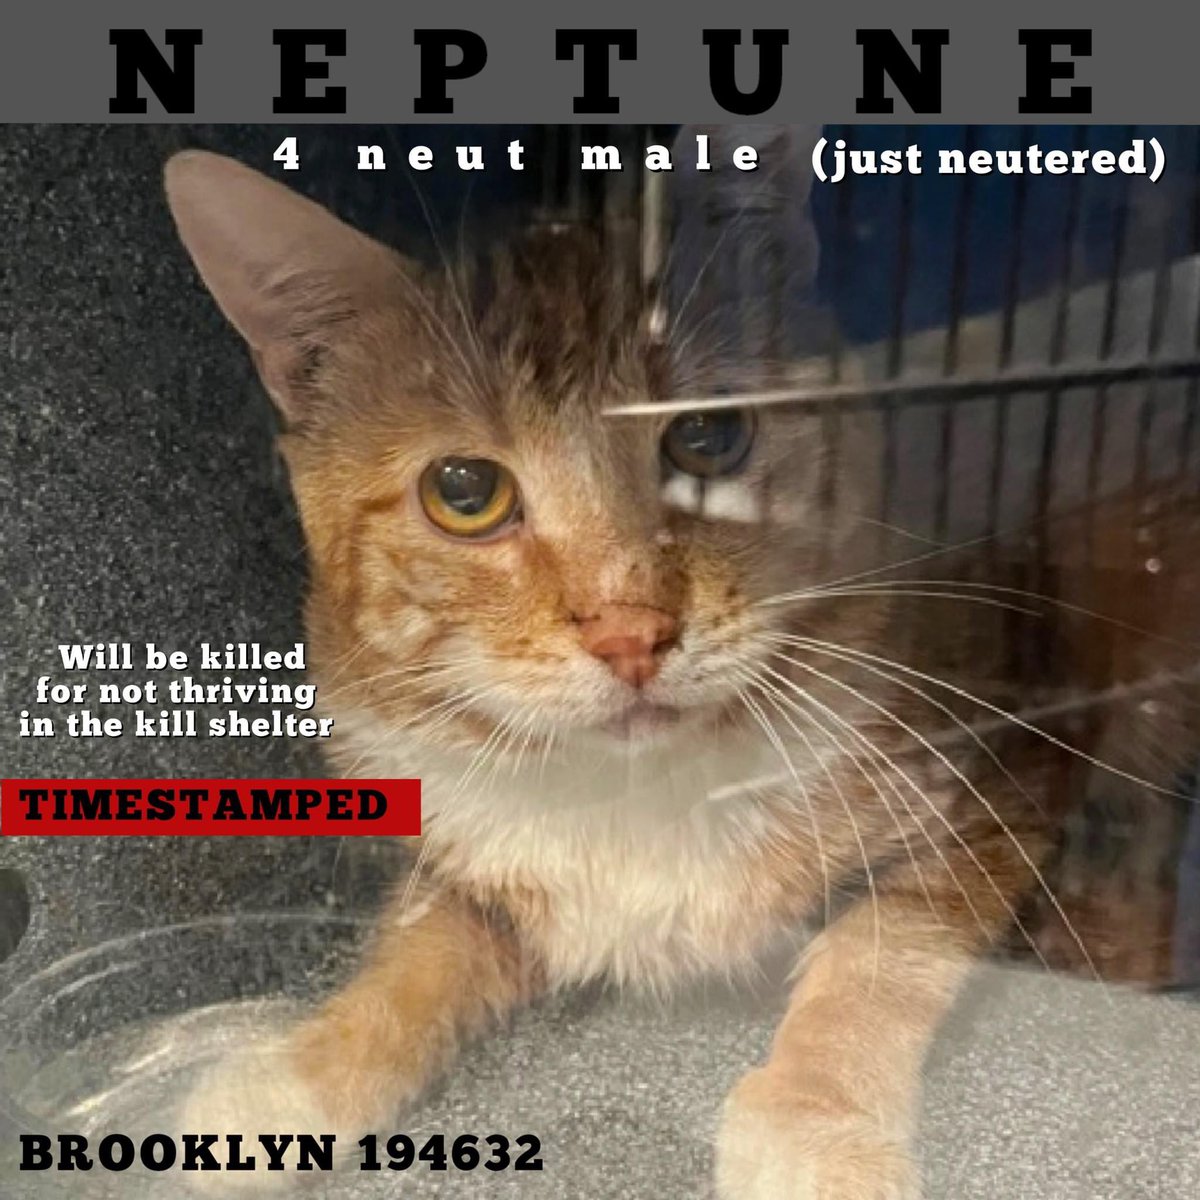 🆘Please RT-adopt-foster! 🆘

NEPTUNE is on the “emergency placement” list at #ACCNYC and needs out of the shelter by 12 NOON 5/30!

#URGENT #NYC #CATS #NYCACC #TeamKittySOS #AdoptDontShop #CatsOfTwitter 
newhope.shelterbuddy.com/Animal/Profile…